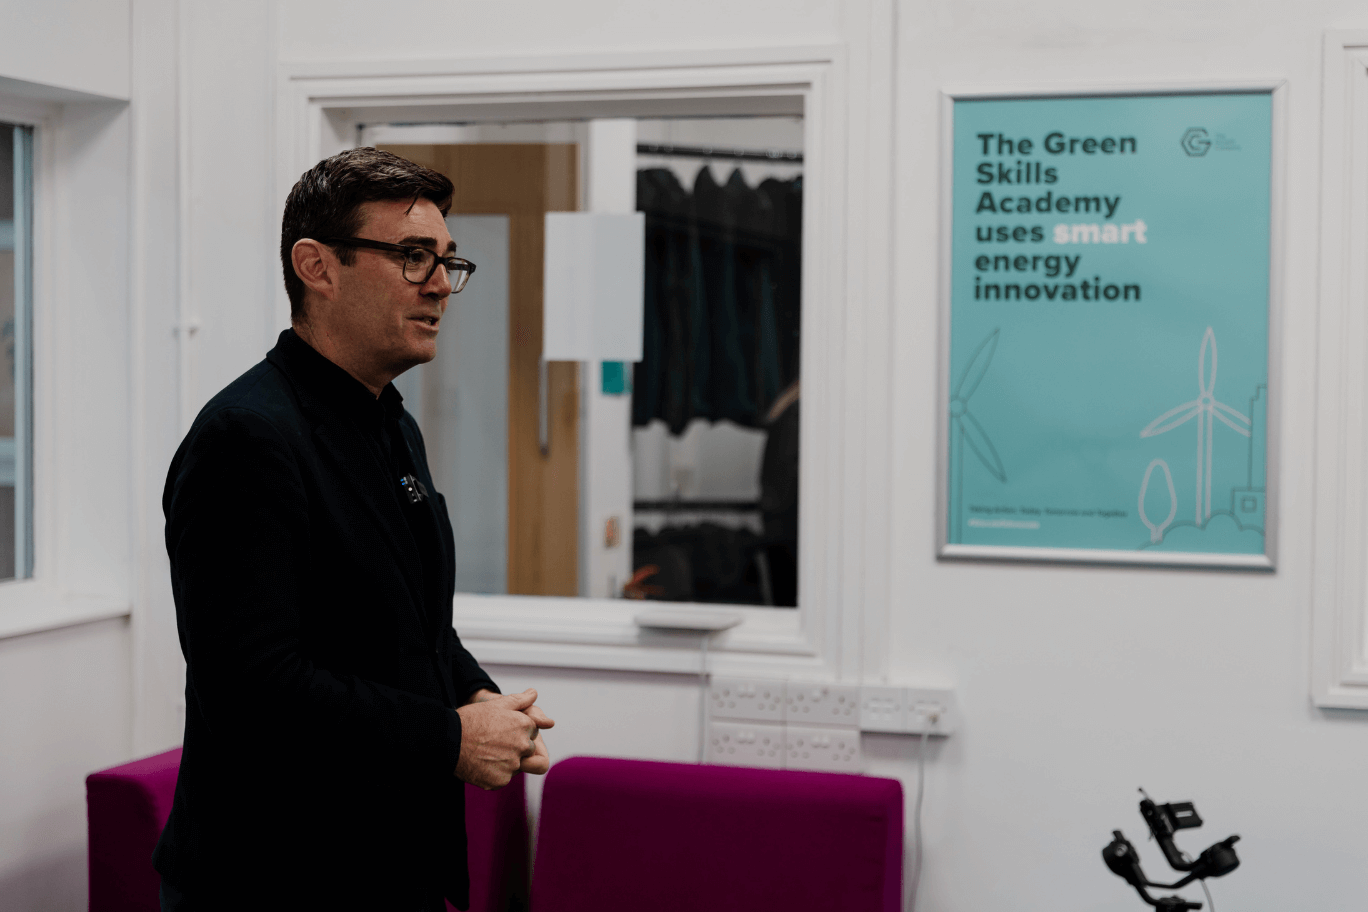 Mayor of GM Andy Burnham attends the Green Skills Academy event, standing in front of a poster